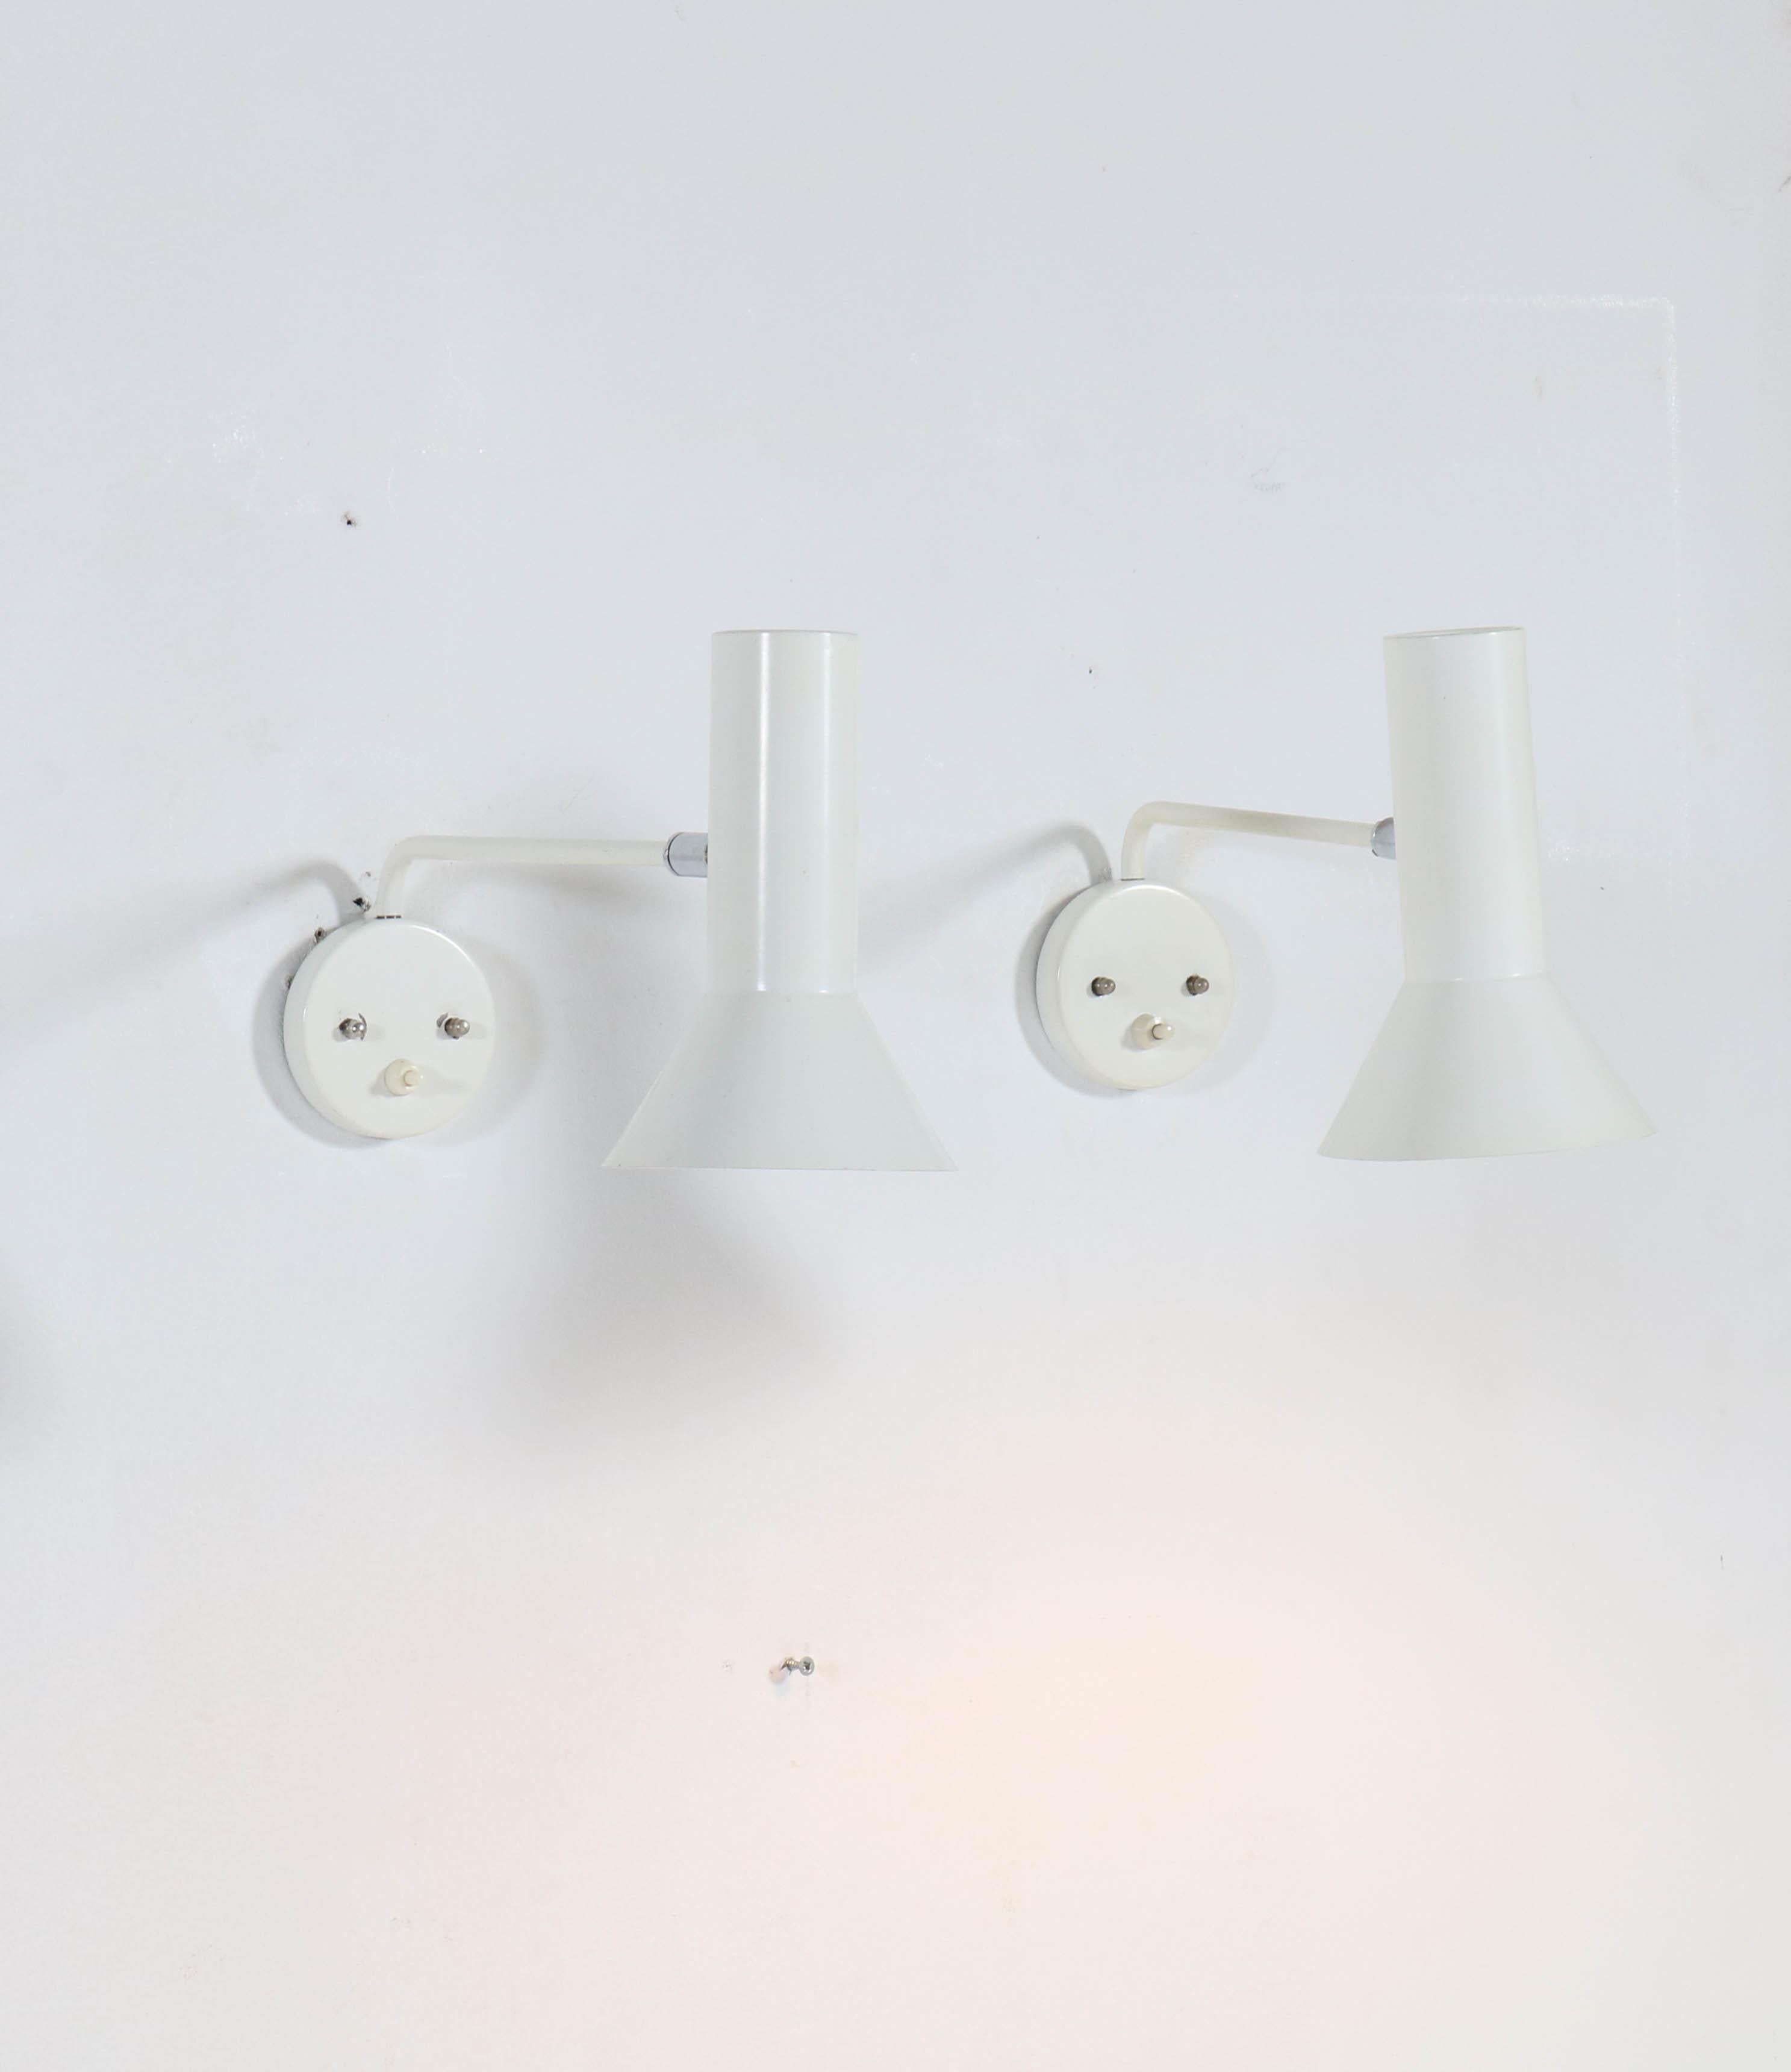 Wonderful pair of Mid-Century Modern wall lights or sconces.
Design by RAAK, Amsterdam.
Striking Dutch design from the 1920s.
White lacquered metal with chrome details.
In good original condition with minor wear consistent with age and